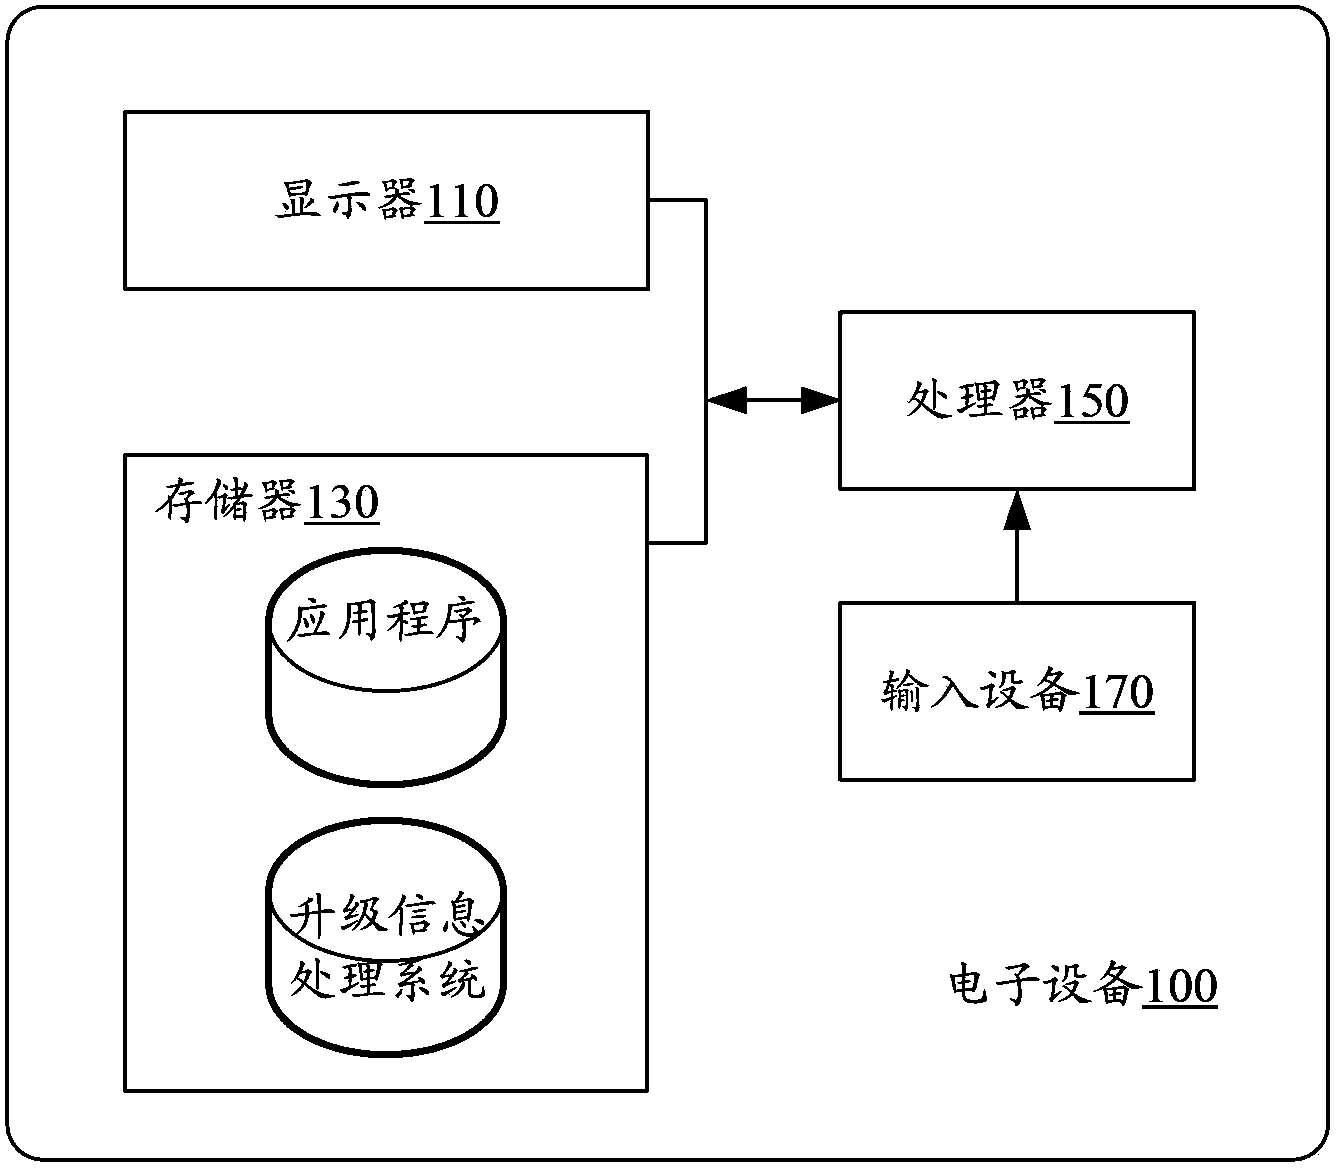 Method and device for processing upgrading information